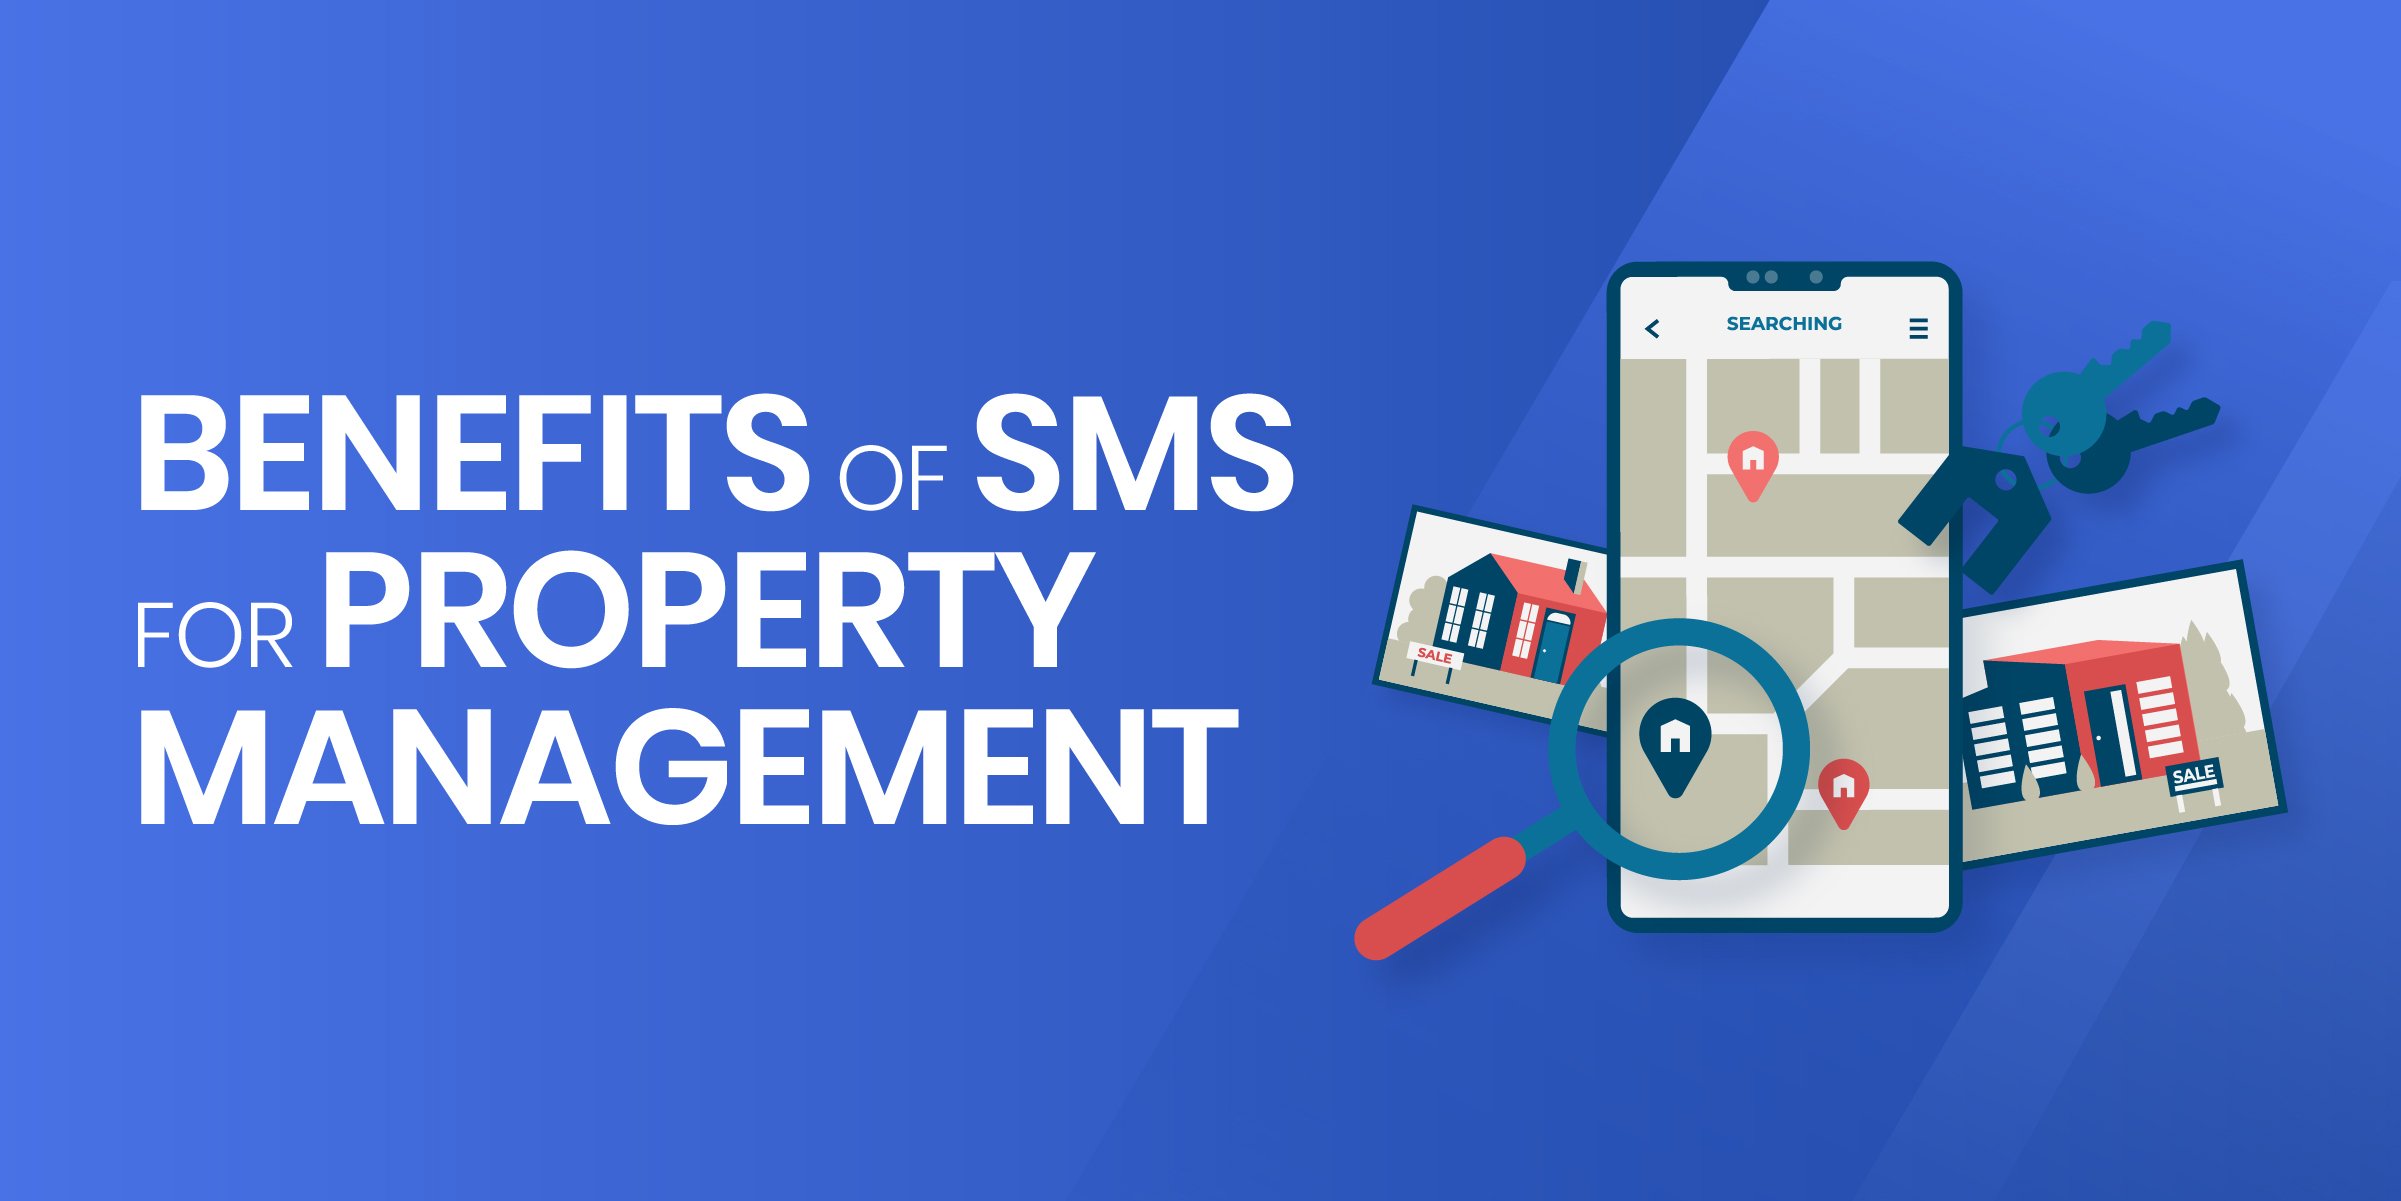 Benefits of SMS for Property Management